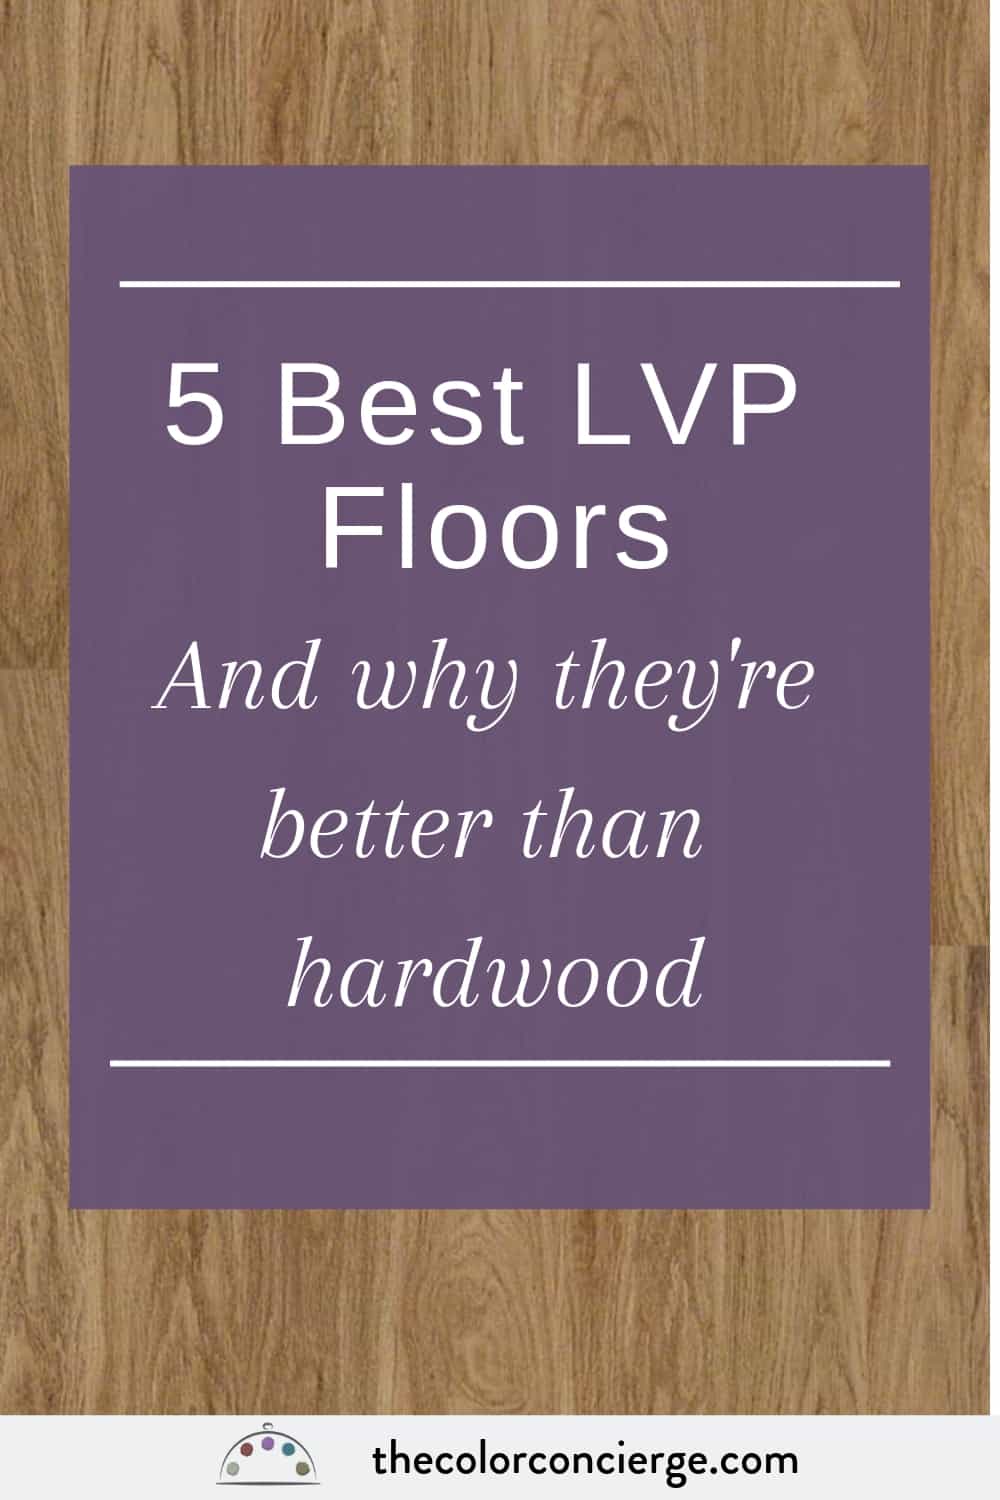 Everything about LVP